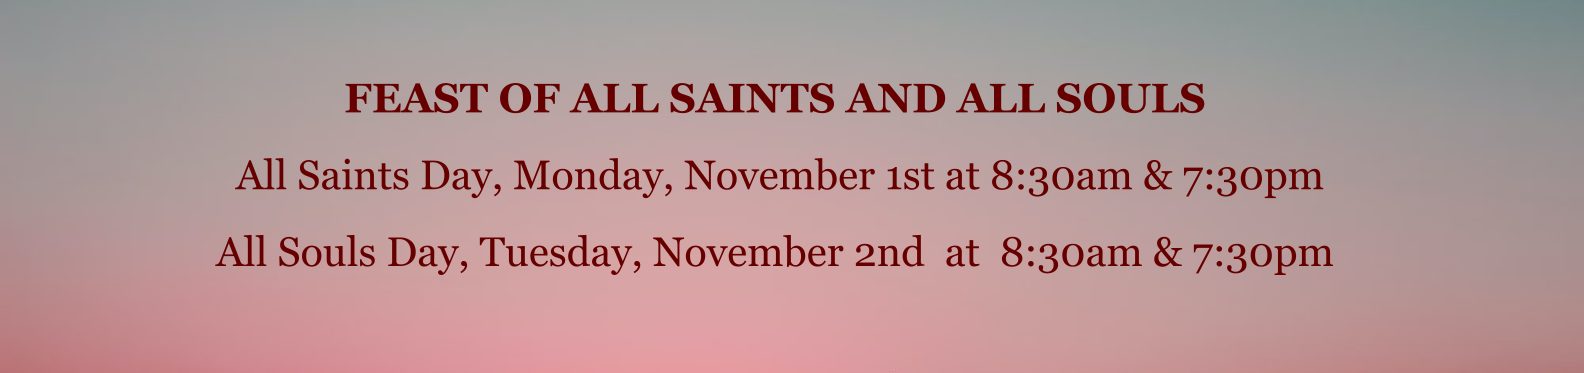 FEAST OF ALL SAINTS AND ALL SOULS